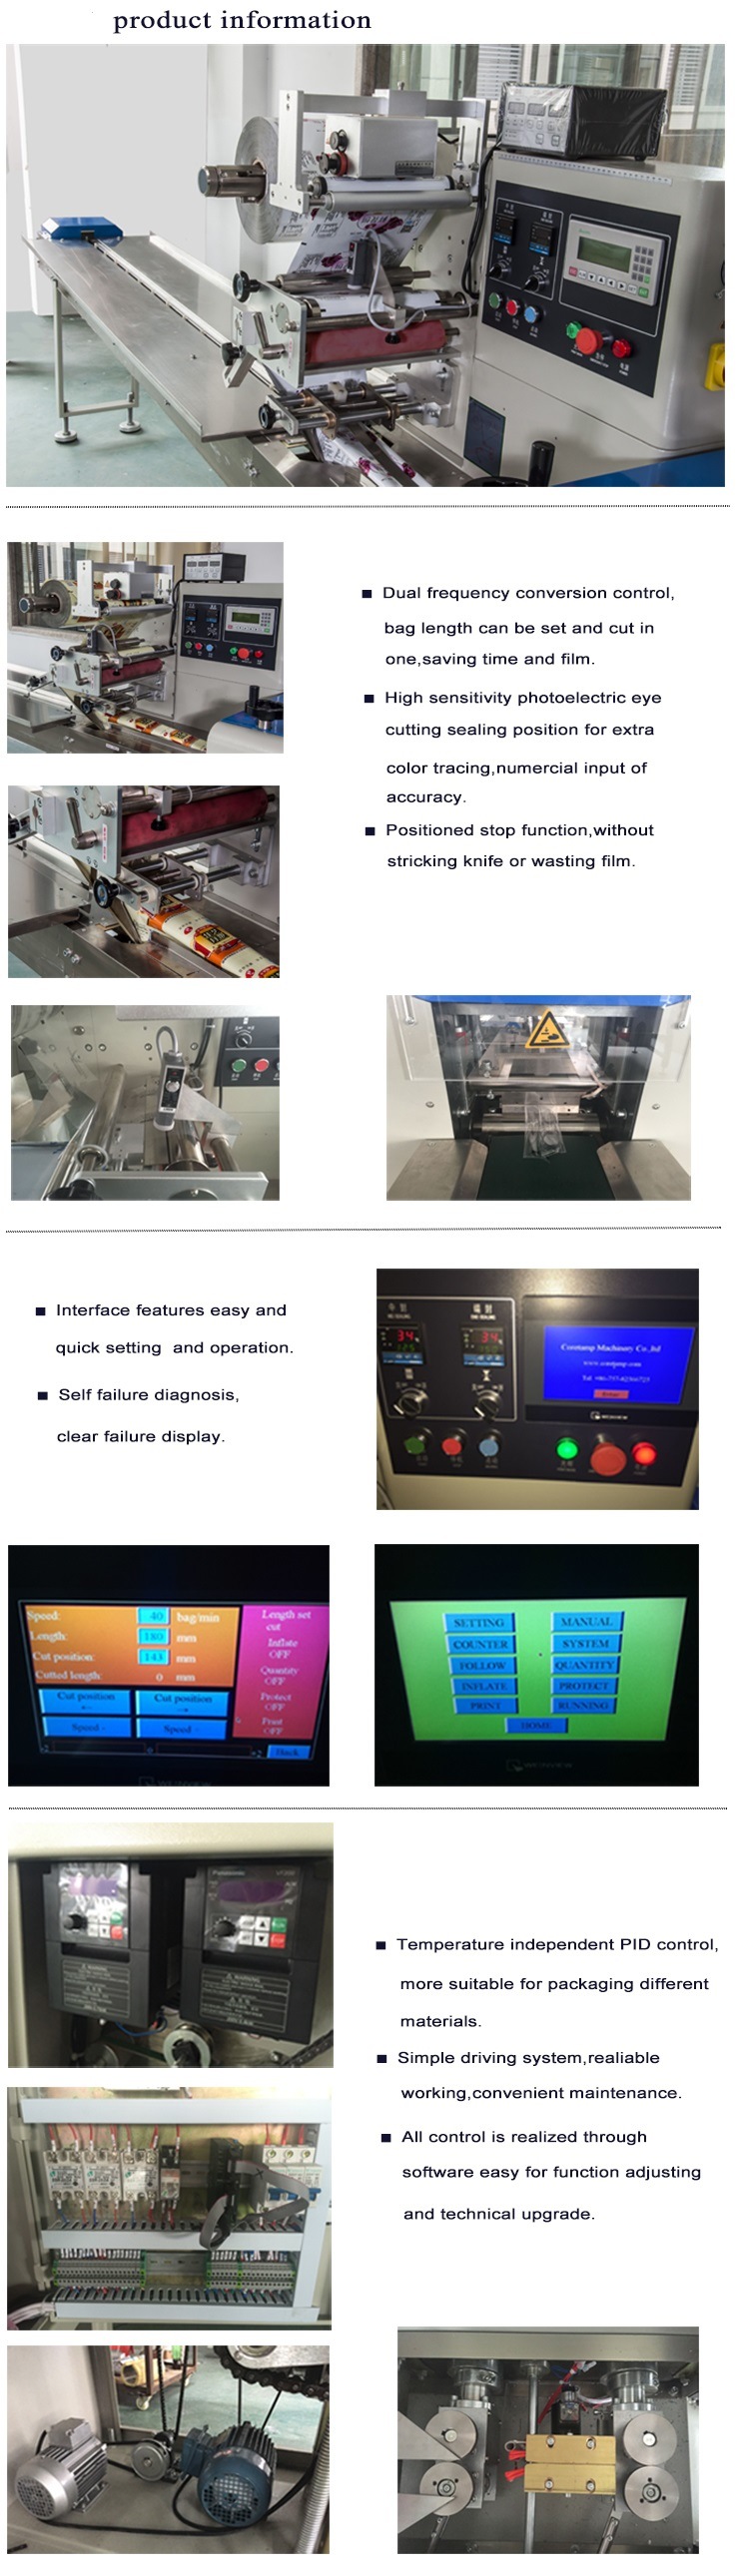 Coil up Flow Wrapper Packing Machine for Cake Bread Meat Muffin